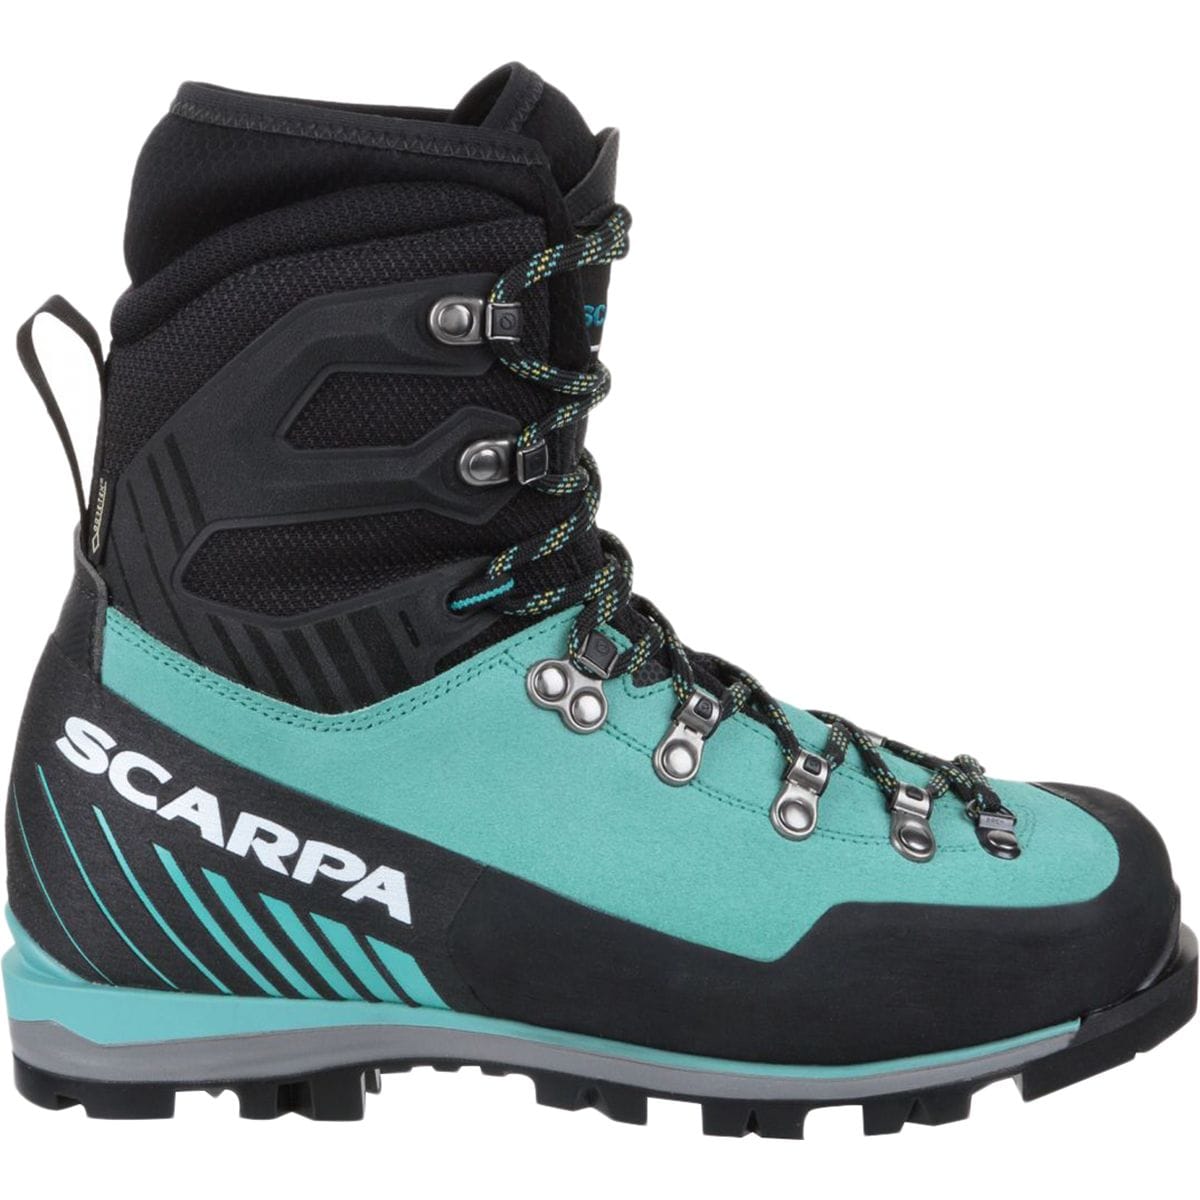 Pre-owned Scarpa Mont Blanc Pro Gtx Mountaineering Boot - Women's In Green Blue